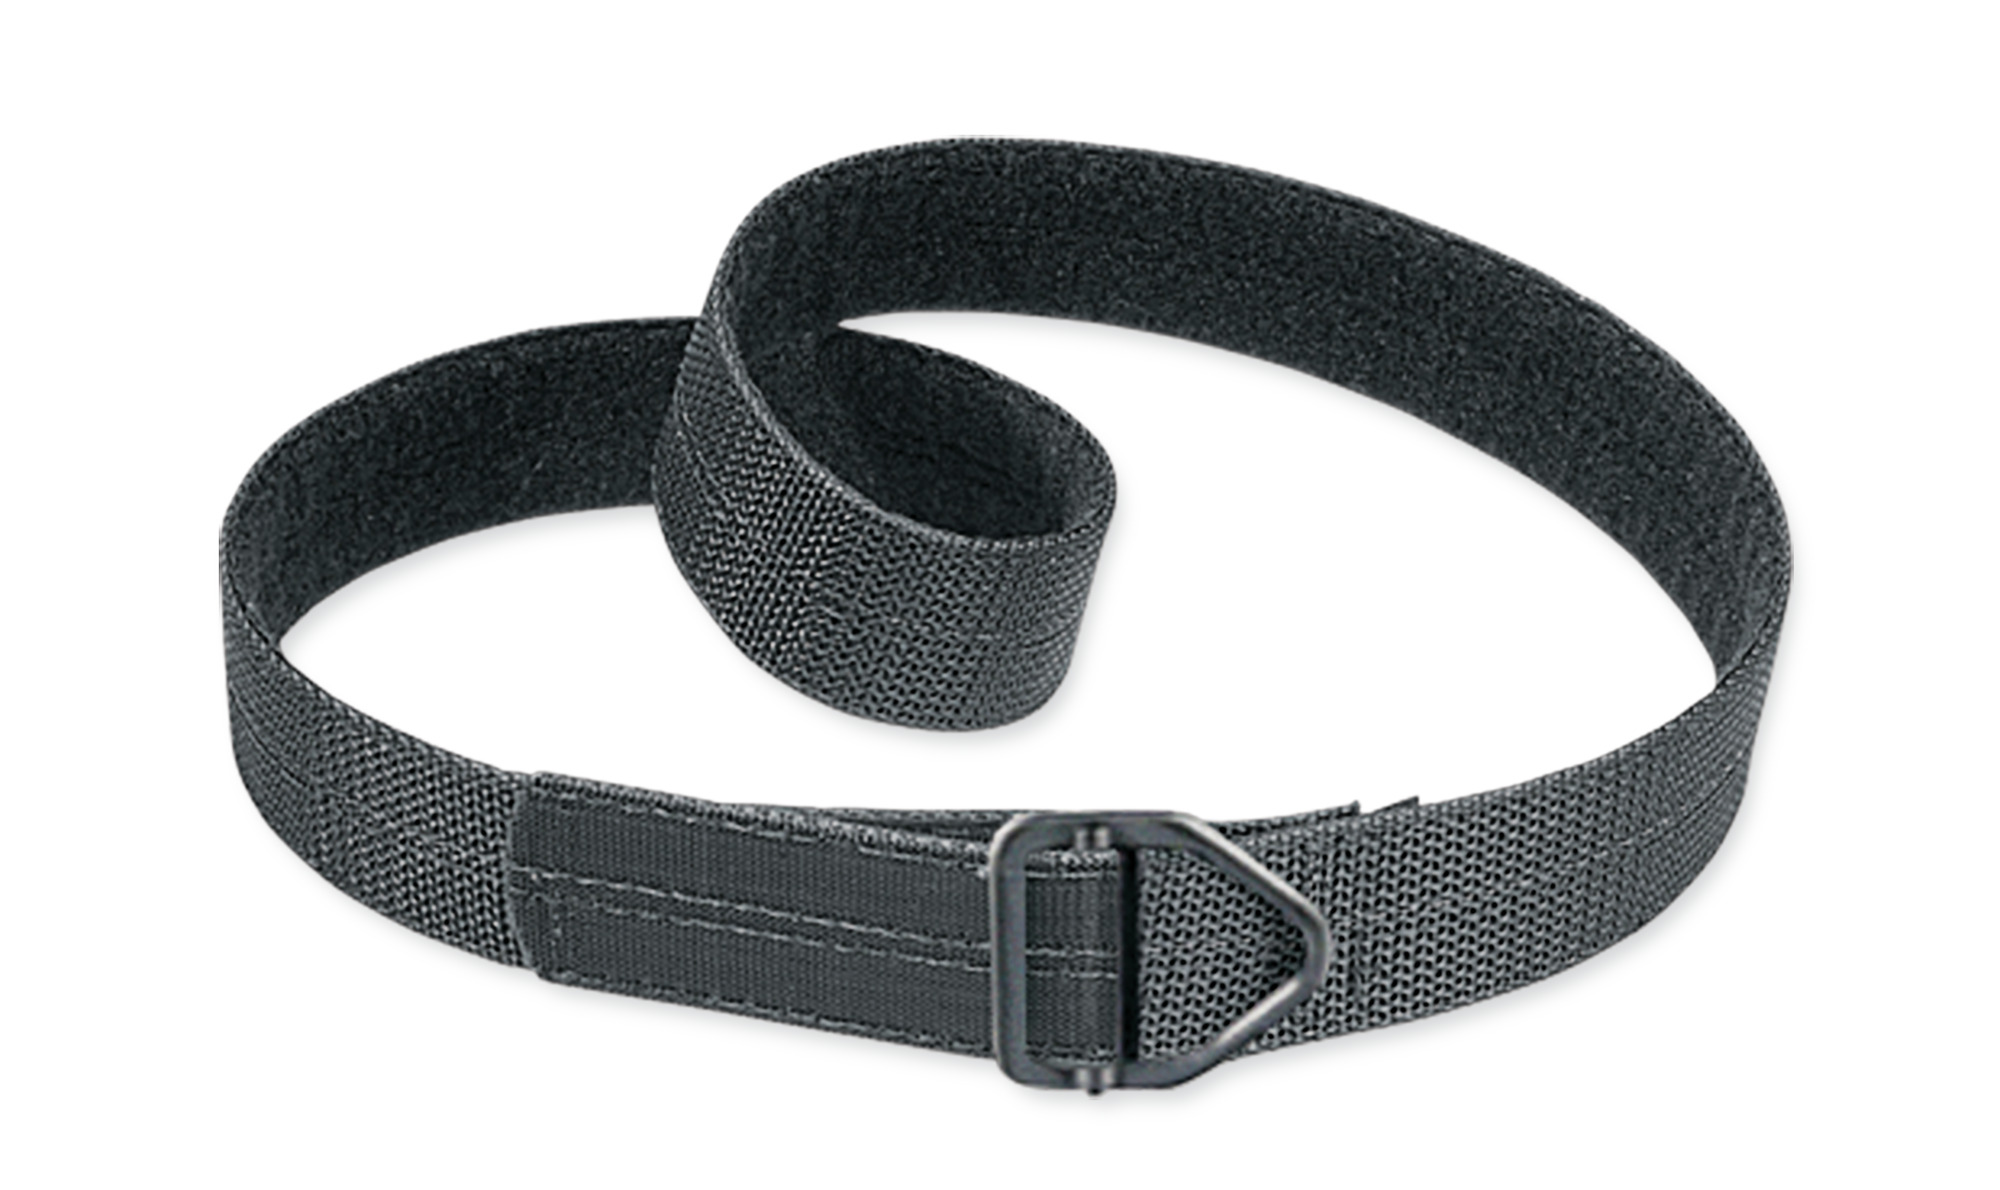 Buy Reinforced Instructor's Belt And More | Uncle Mikes